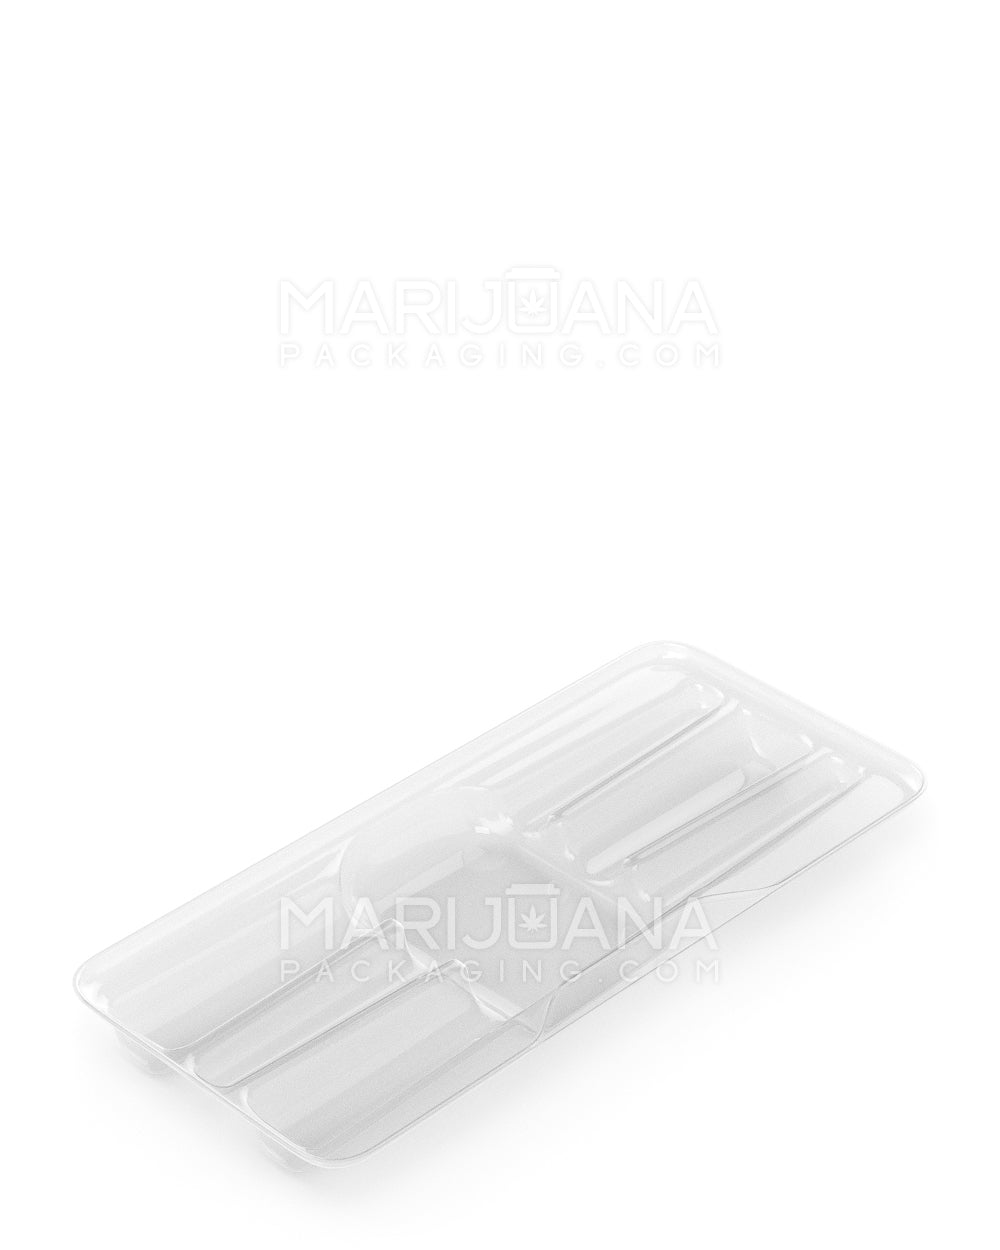 Edible & Joint Box Insert Tray for 3 King Size Pre Rolled Cones | 109mm - Clear Plastic - 100 Count - 4